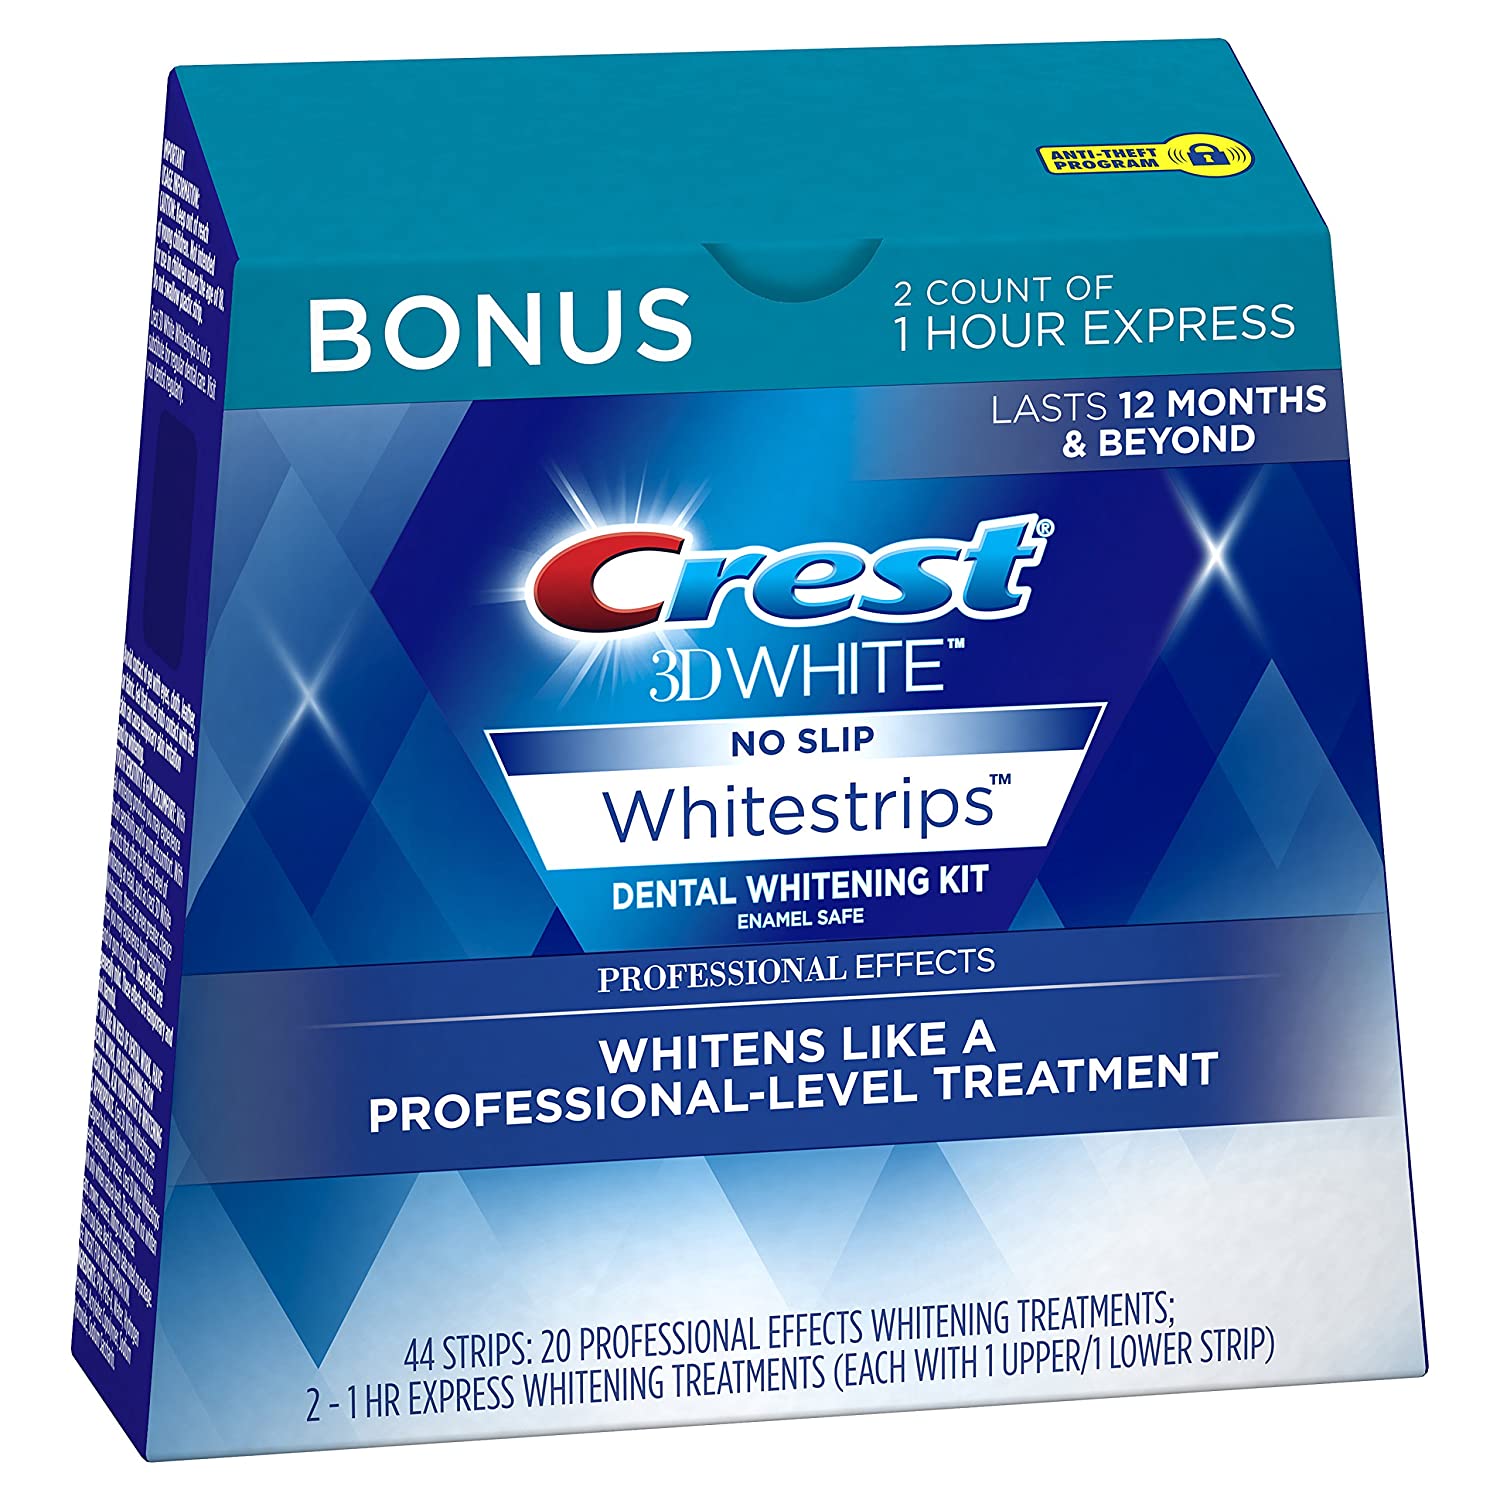 My selection for Best teeth whitening product Crest 3D White Professional Effects Whitestrips